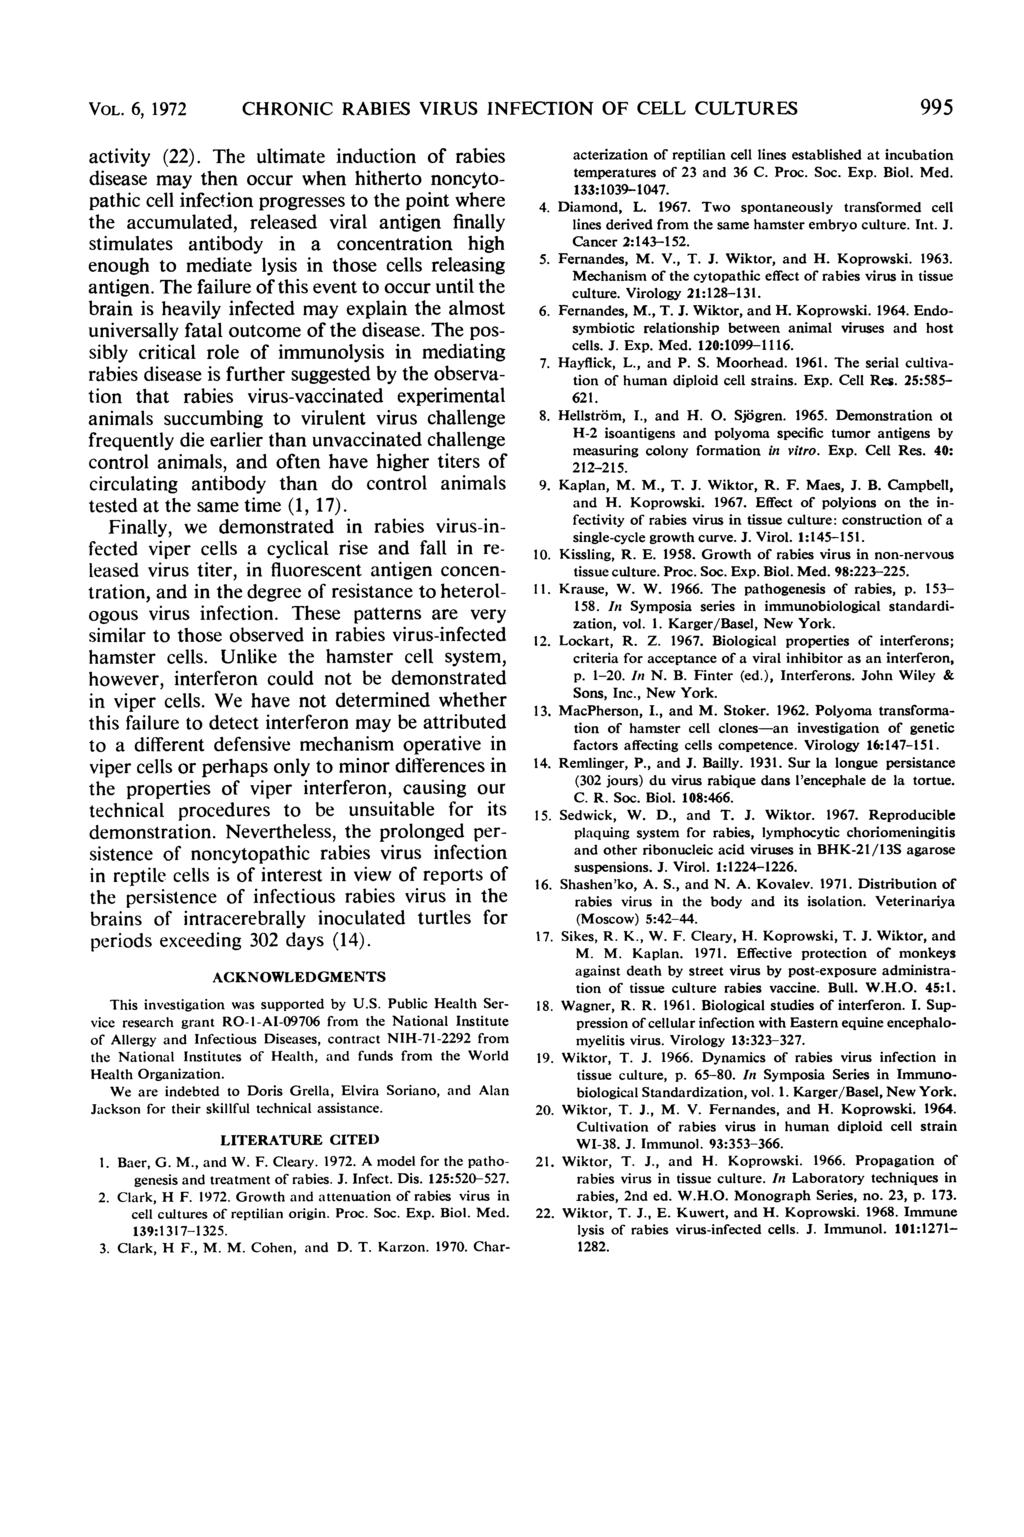 VOL. 6, 1972 CHRONIC RABIES VIRUS INFECTION OF CELL CULTURES 995 activity (22).